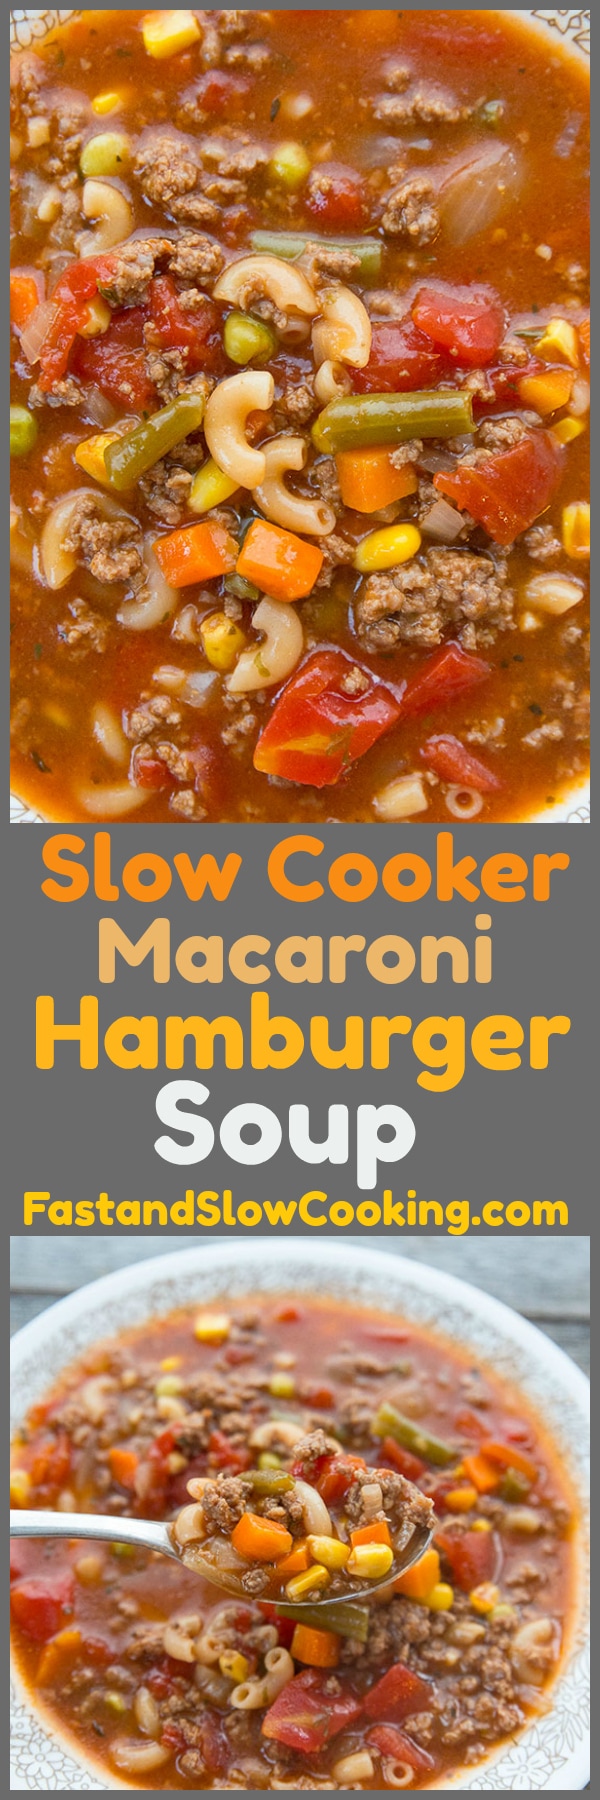 This Slow Cooker Macaroni Hamburger Soup Recipe will make everyone at the dinner table happy when it's suppertime! This recipe is large enough for leftovers the next day - if you can resist eating two bowls! #crockpot #hamburger #recipe #supper #dinner #slowcooker #soup